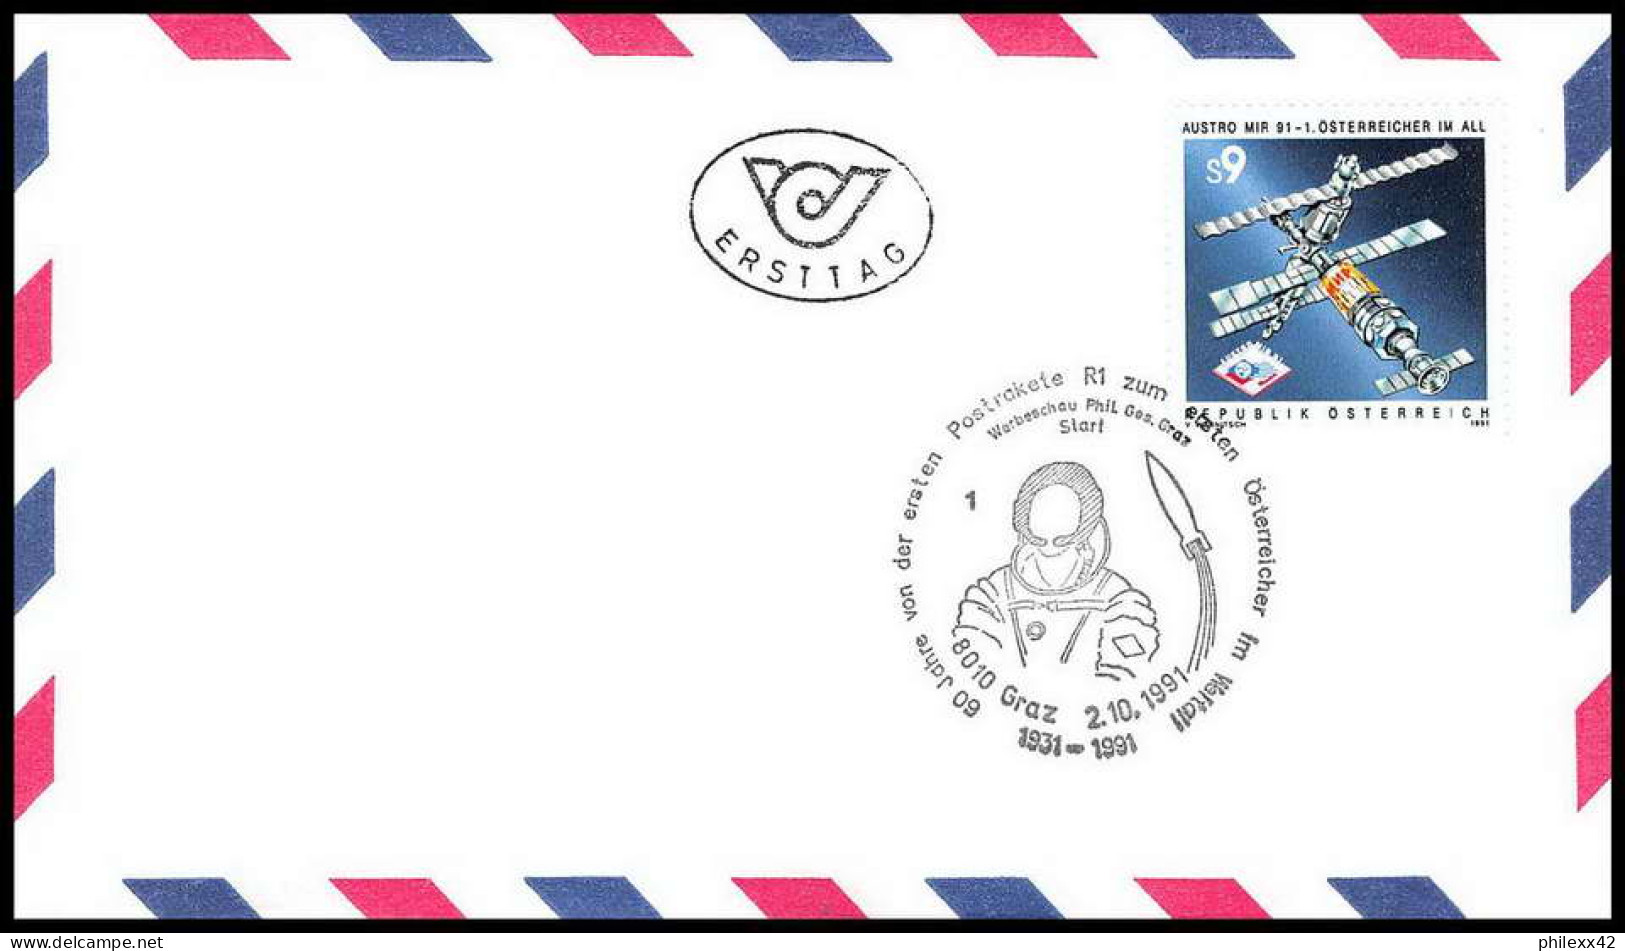 discount 75 cent piece collection lot 4 - 76 Lettres covers espace space différentes usa japan russia france fdc